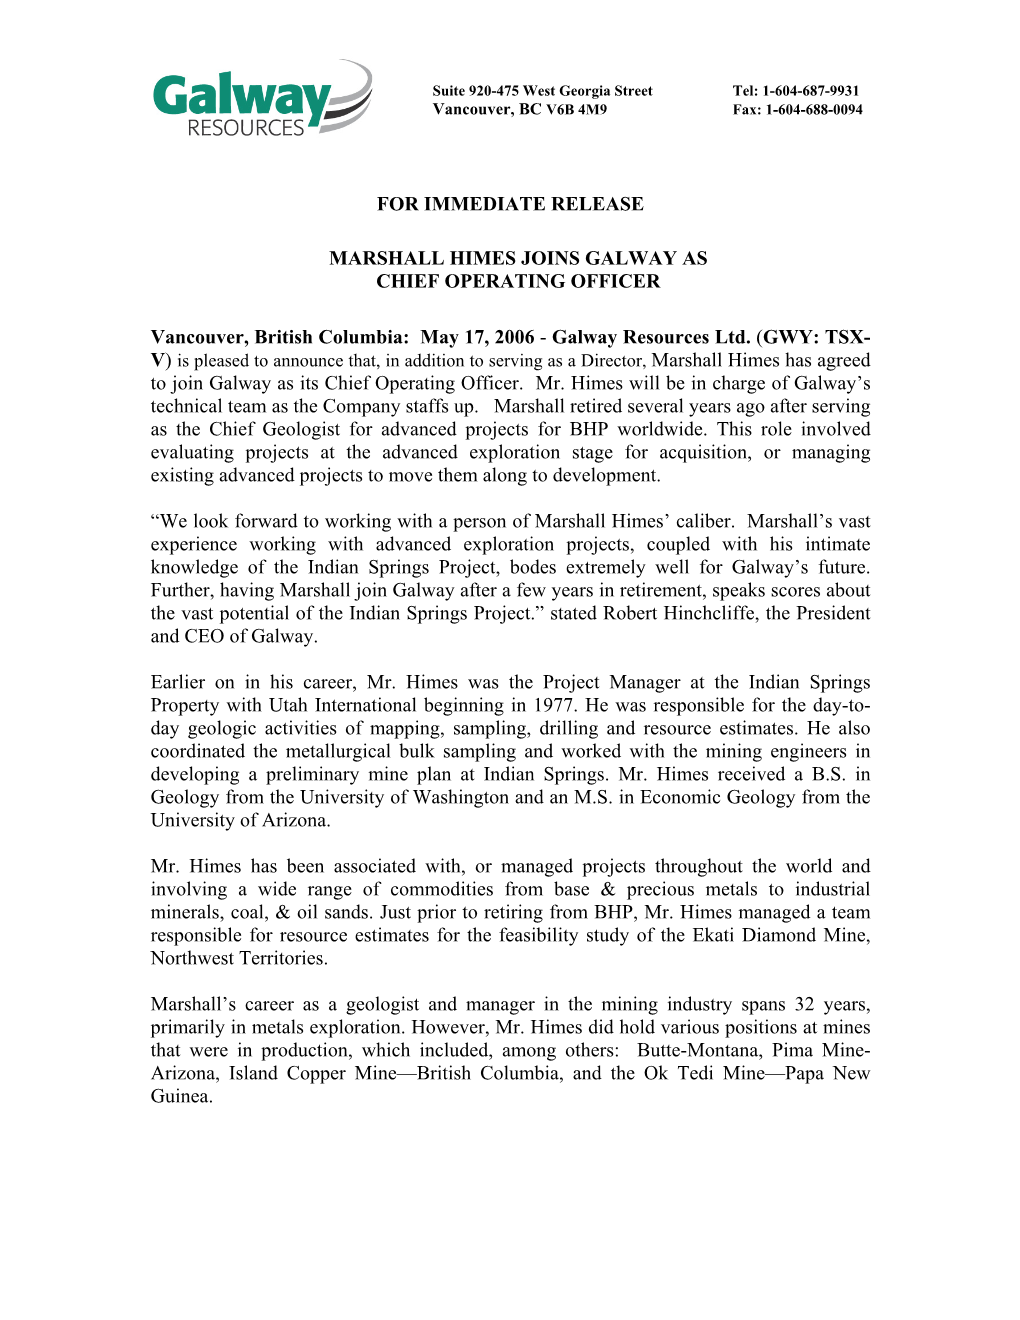 FOR IMMEDIATE RELEASE MARSHALL HIMES JOINS GALWAY AS CHIEF OPERATING OFFICER Vancouver, British Columbia: May 17, 2006